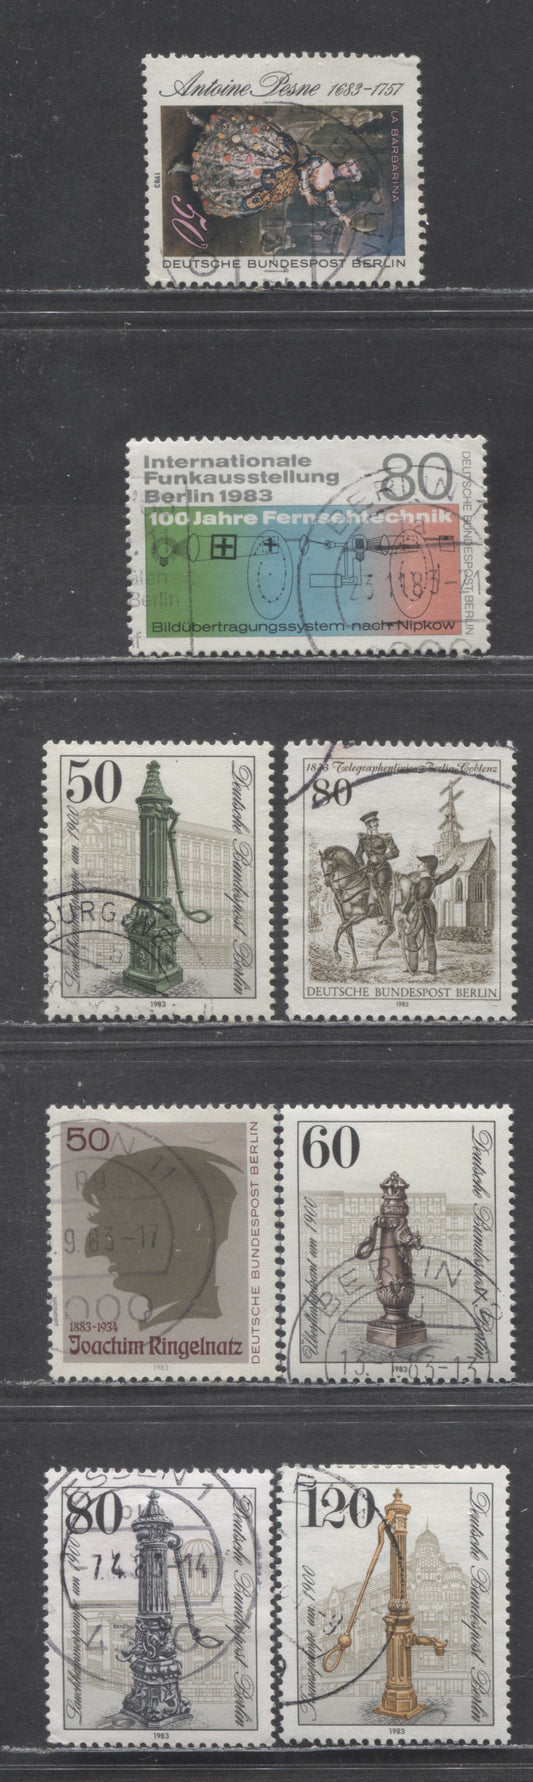 Berlin - Germany SC#9N480-9N487(Mi#689/702) 1983 Commemoratives Issue, 8 Very Fine Used Singles, Click on Listing to See ALL Pictures, Estimated Value $11 USD